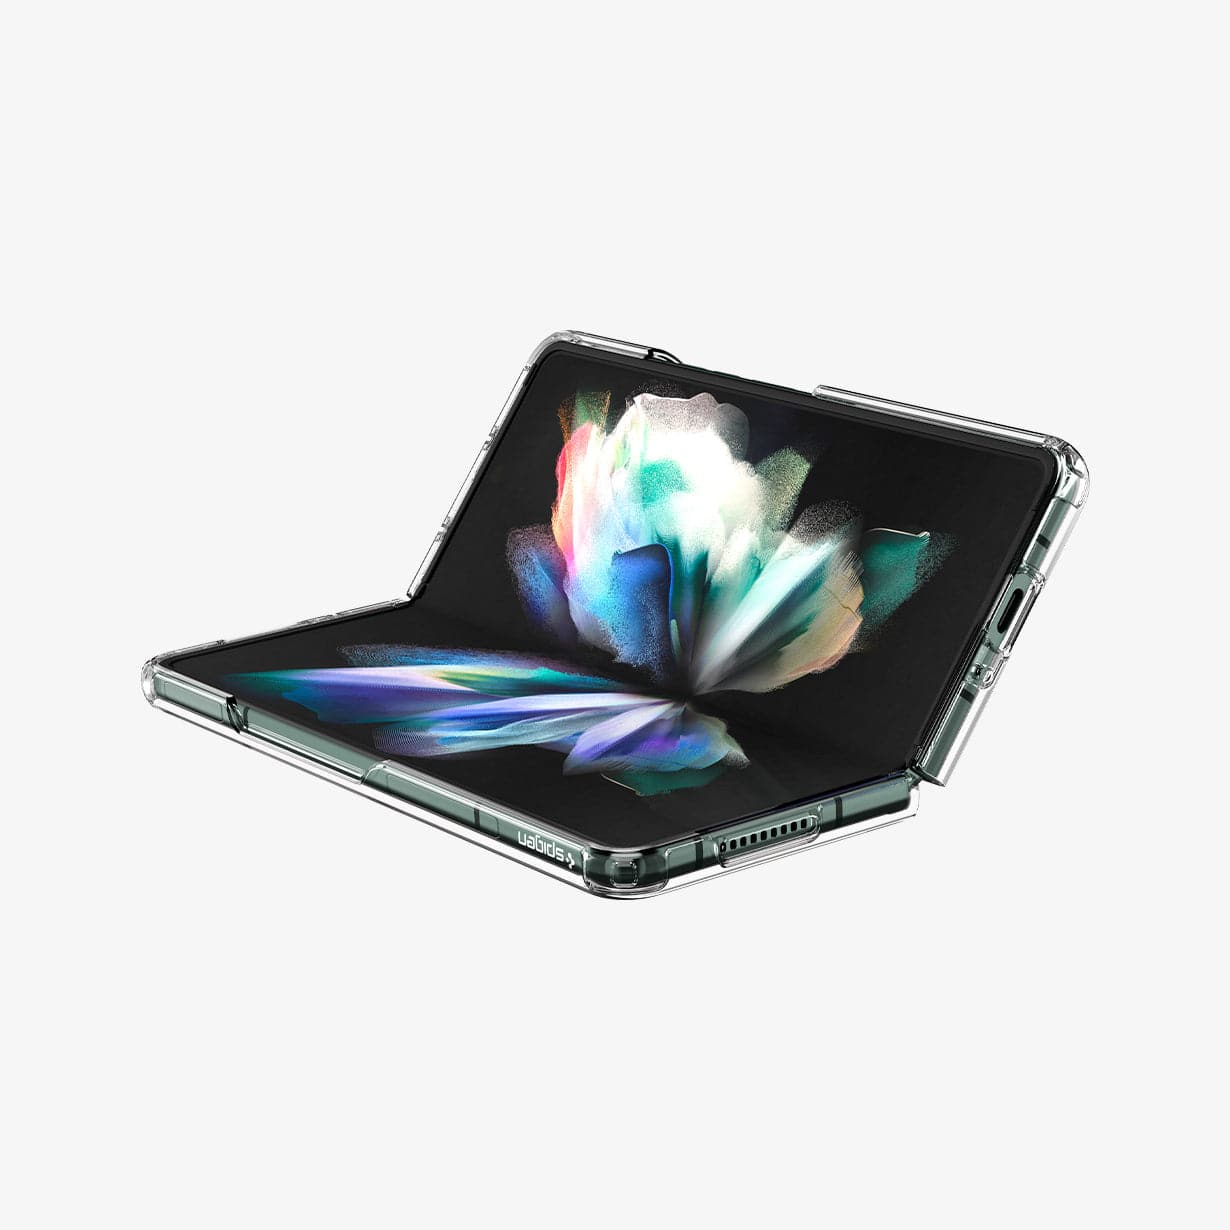 ACS02959 - Galaxy Z Fold 3 Case Ultra Hybrid in crystal clear showing the inside, side and bottom